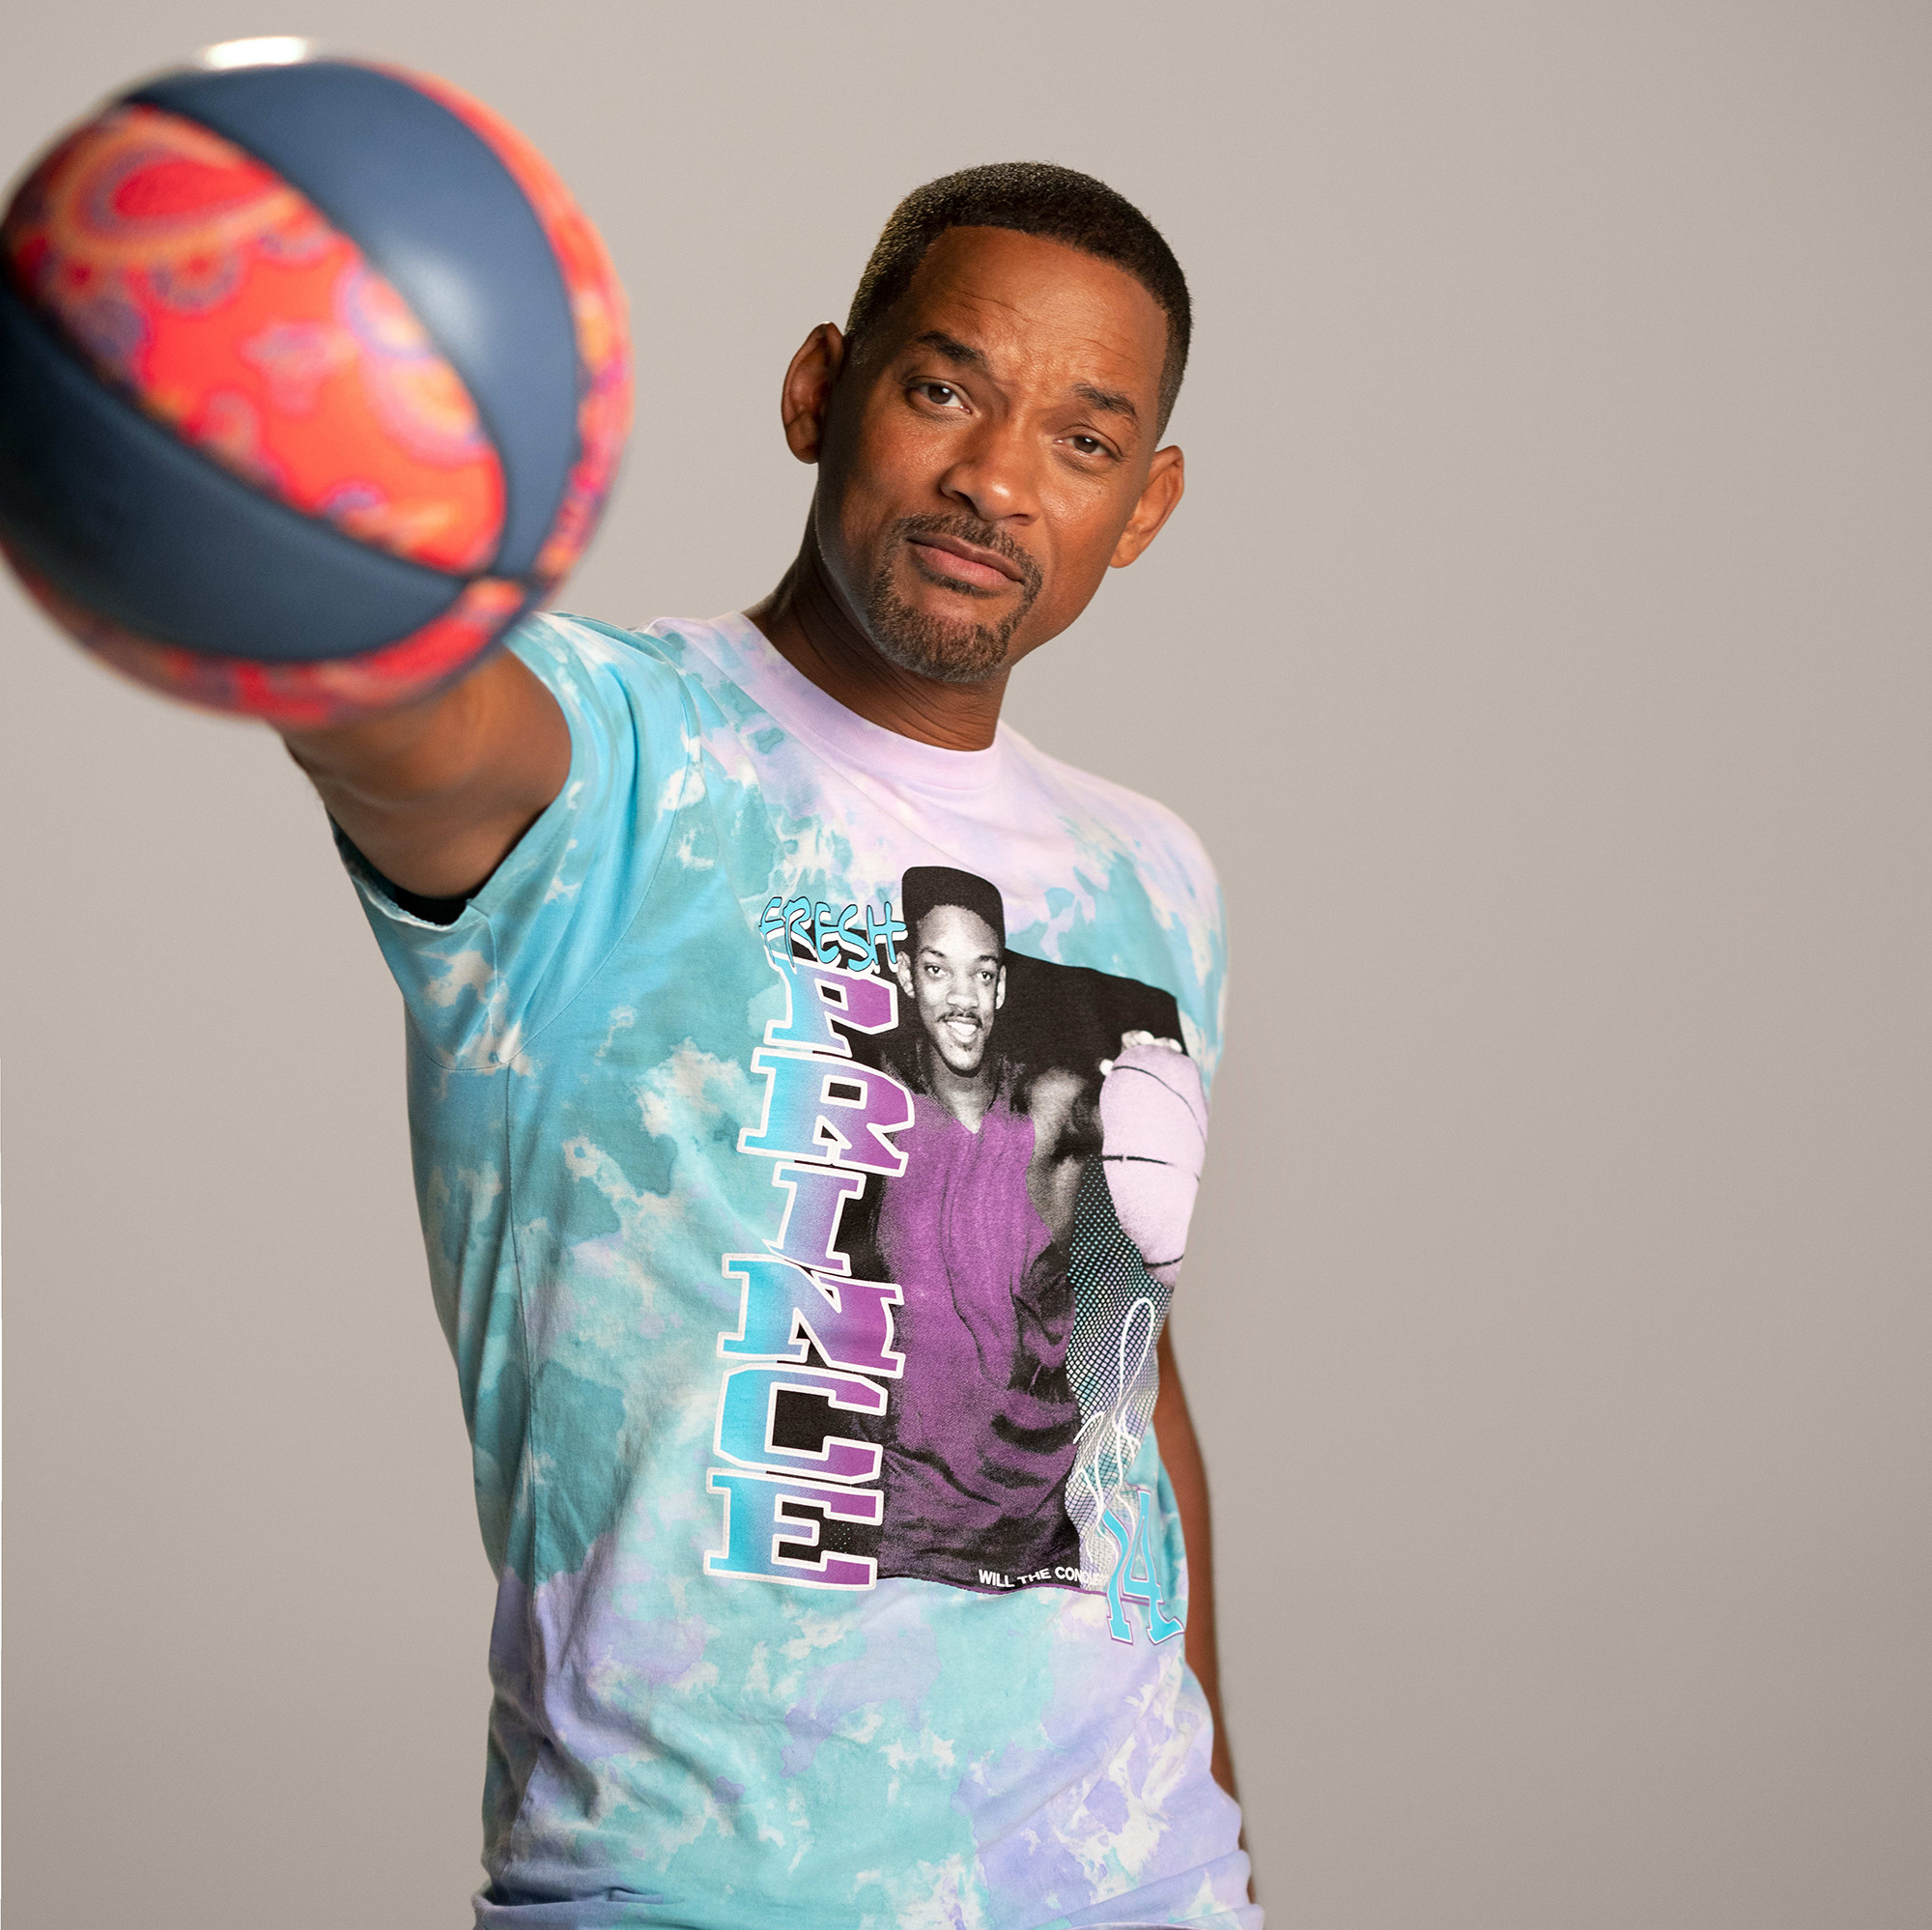 The Fresh Prince of Bel-Air Will Smith Bel-Air Academy Red Silk